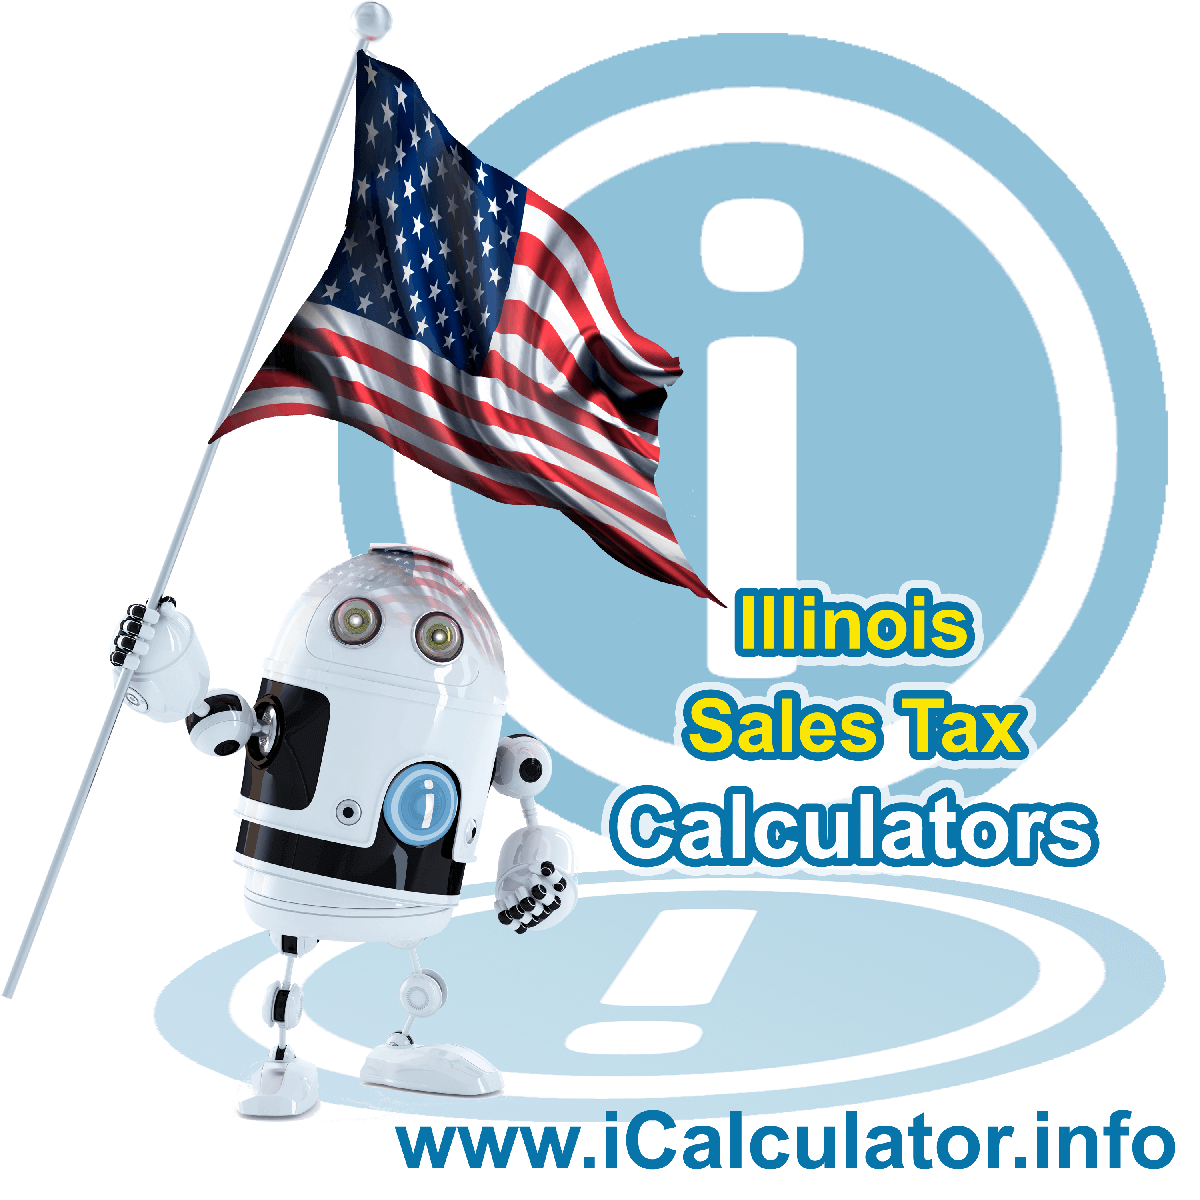 Carlinville Sales Rates: This image illustrates a calculator robot calculating Carlinville sales tax manually using the Carlinville Sales Tax Formula. You can use this information to calculate Carlinville Sales Tax manually or use the Carlinville Sales Tax Calculator to calculate sales tax online.